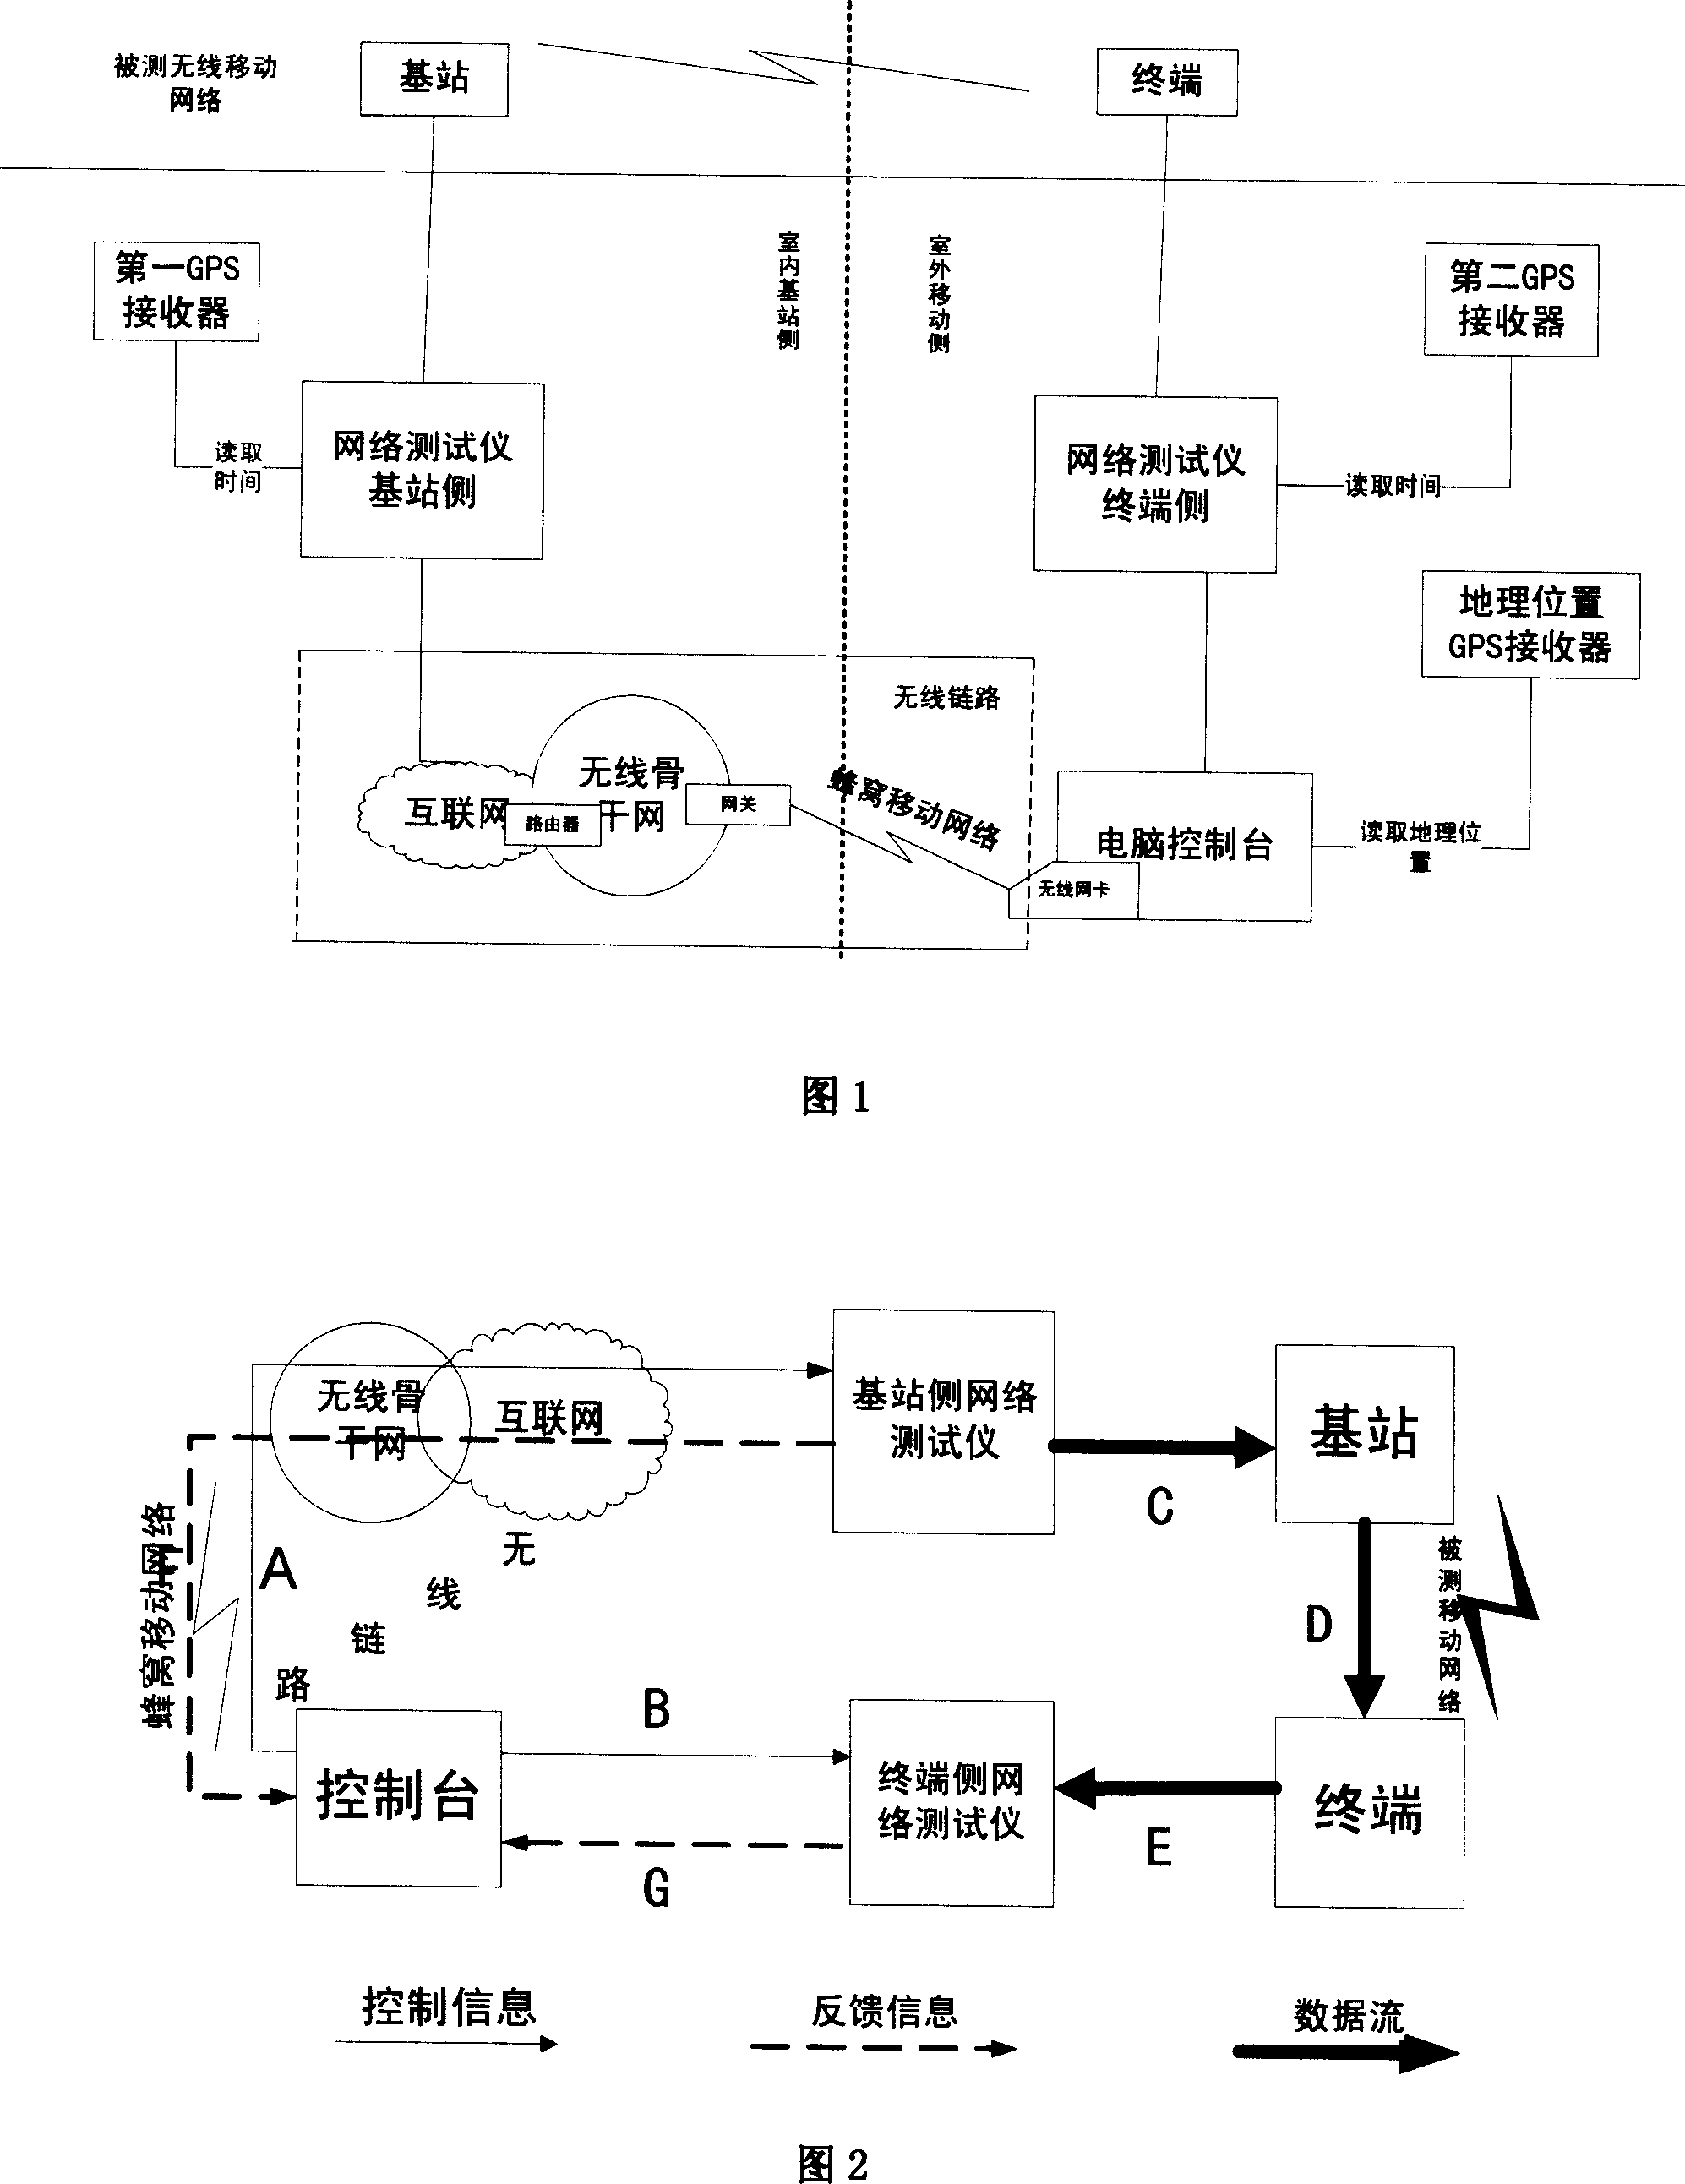 Device and method for detecting broadband mobile communication network property based on service analogue